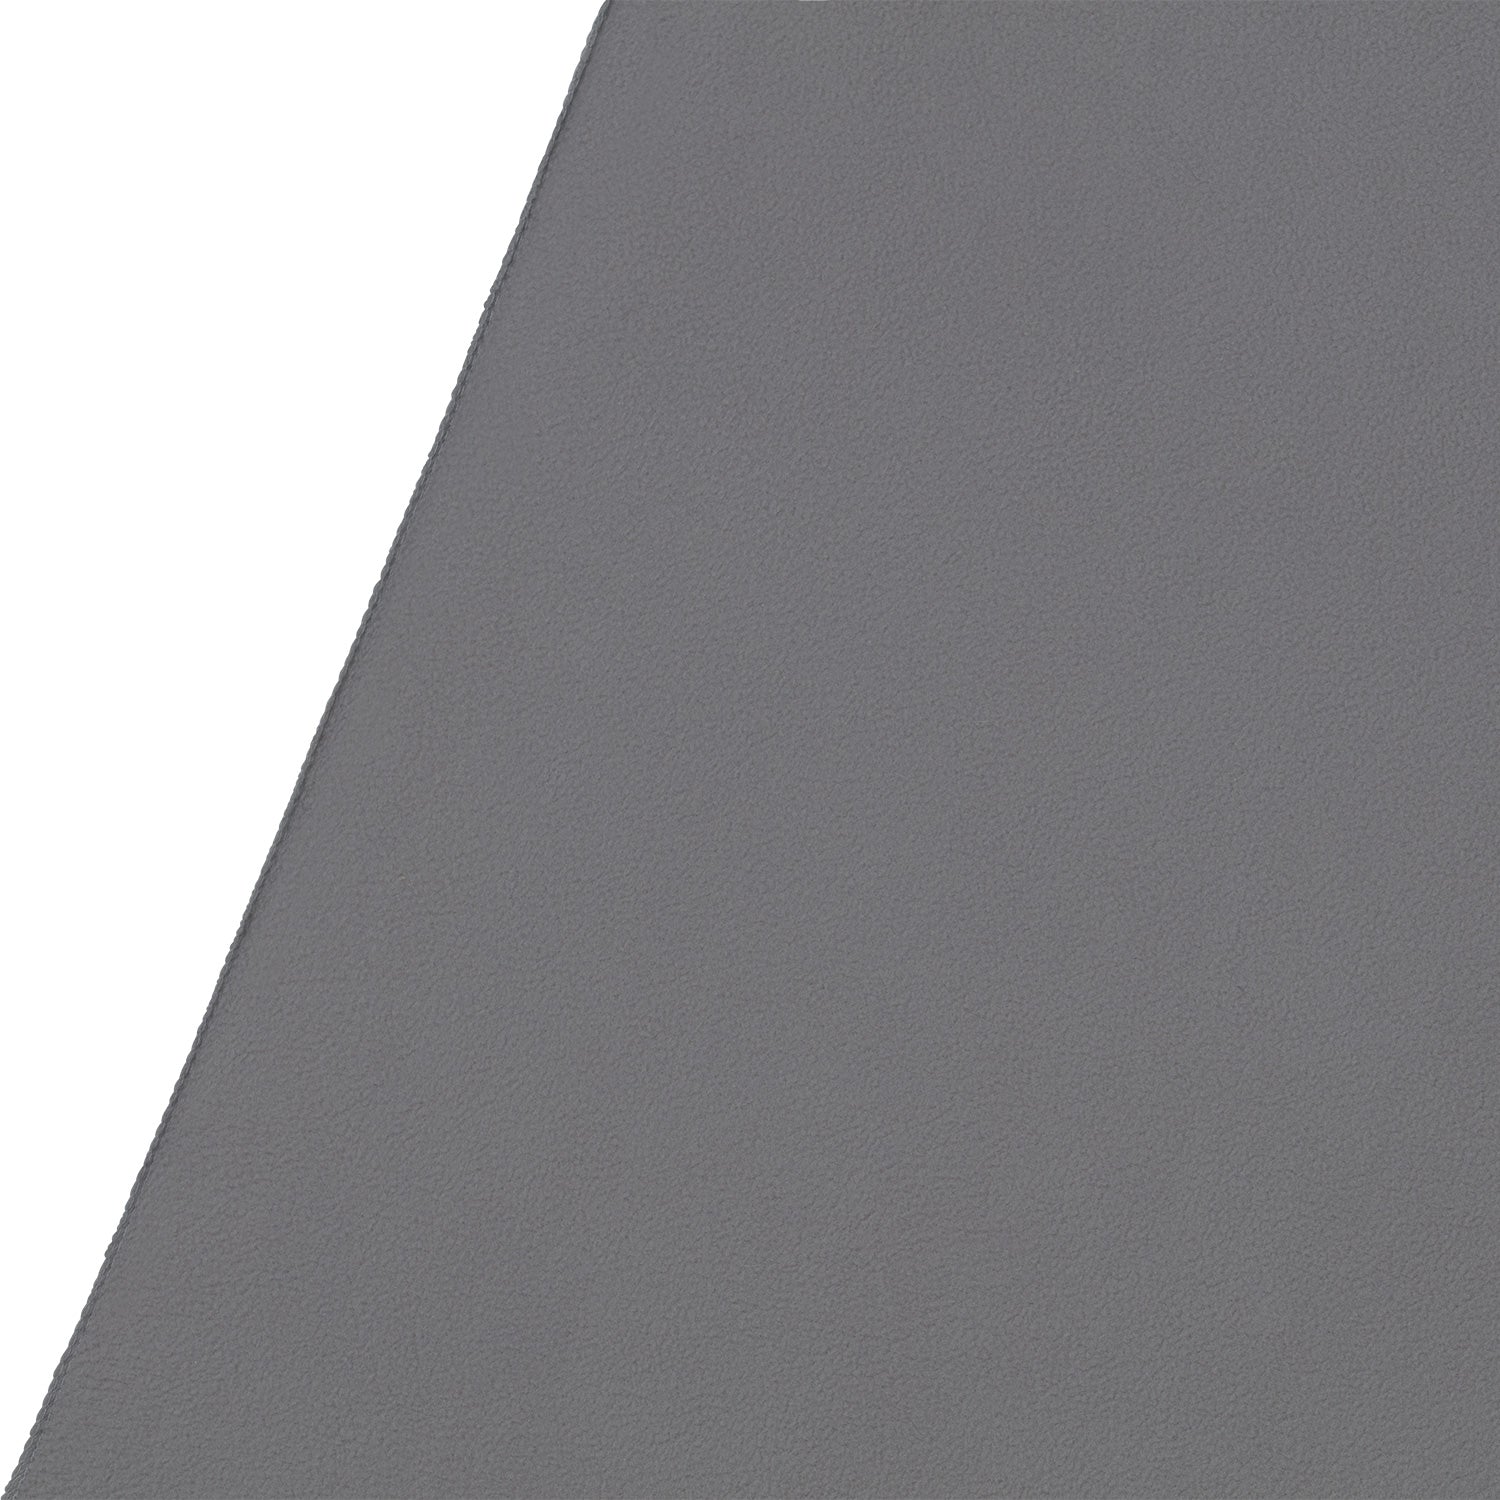 Wrinkle-Resistant Backdrop - Neutral Gray (9' x 10')